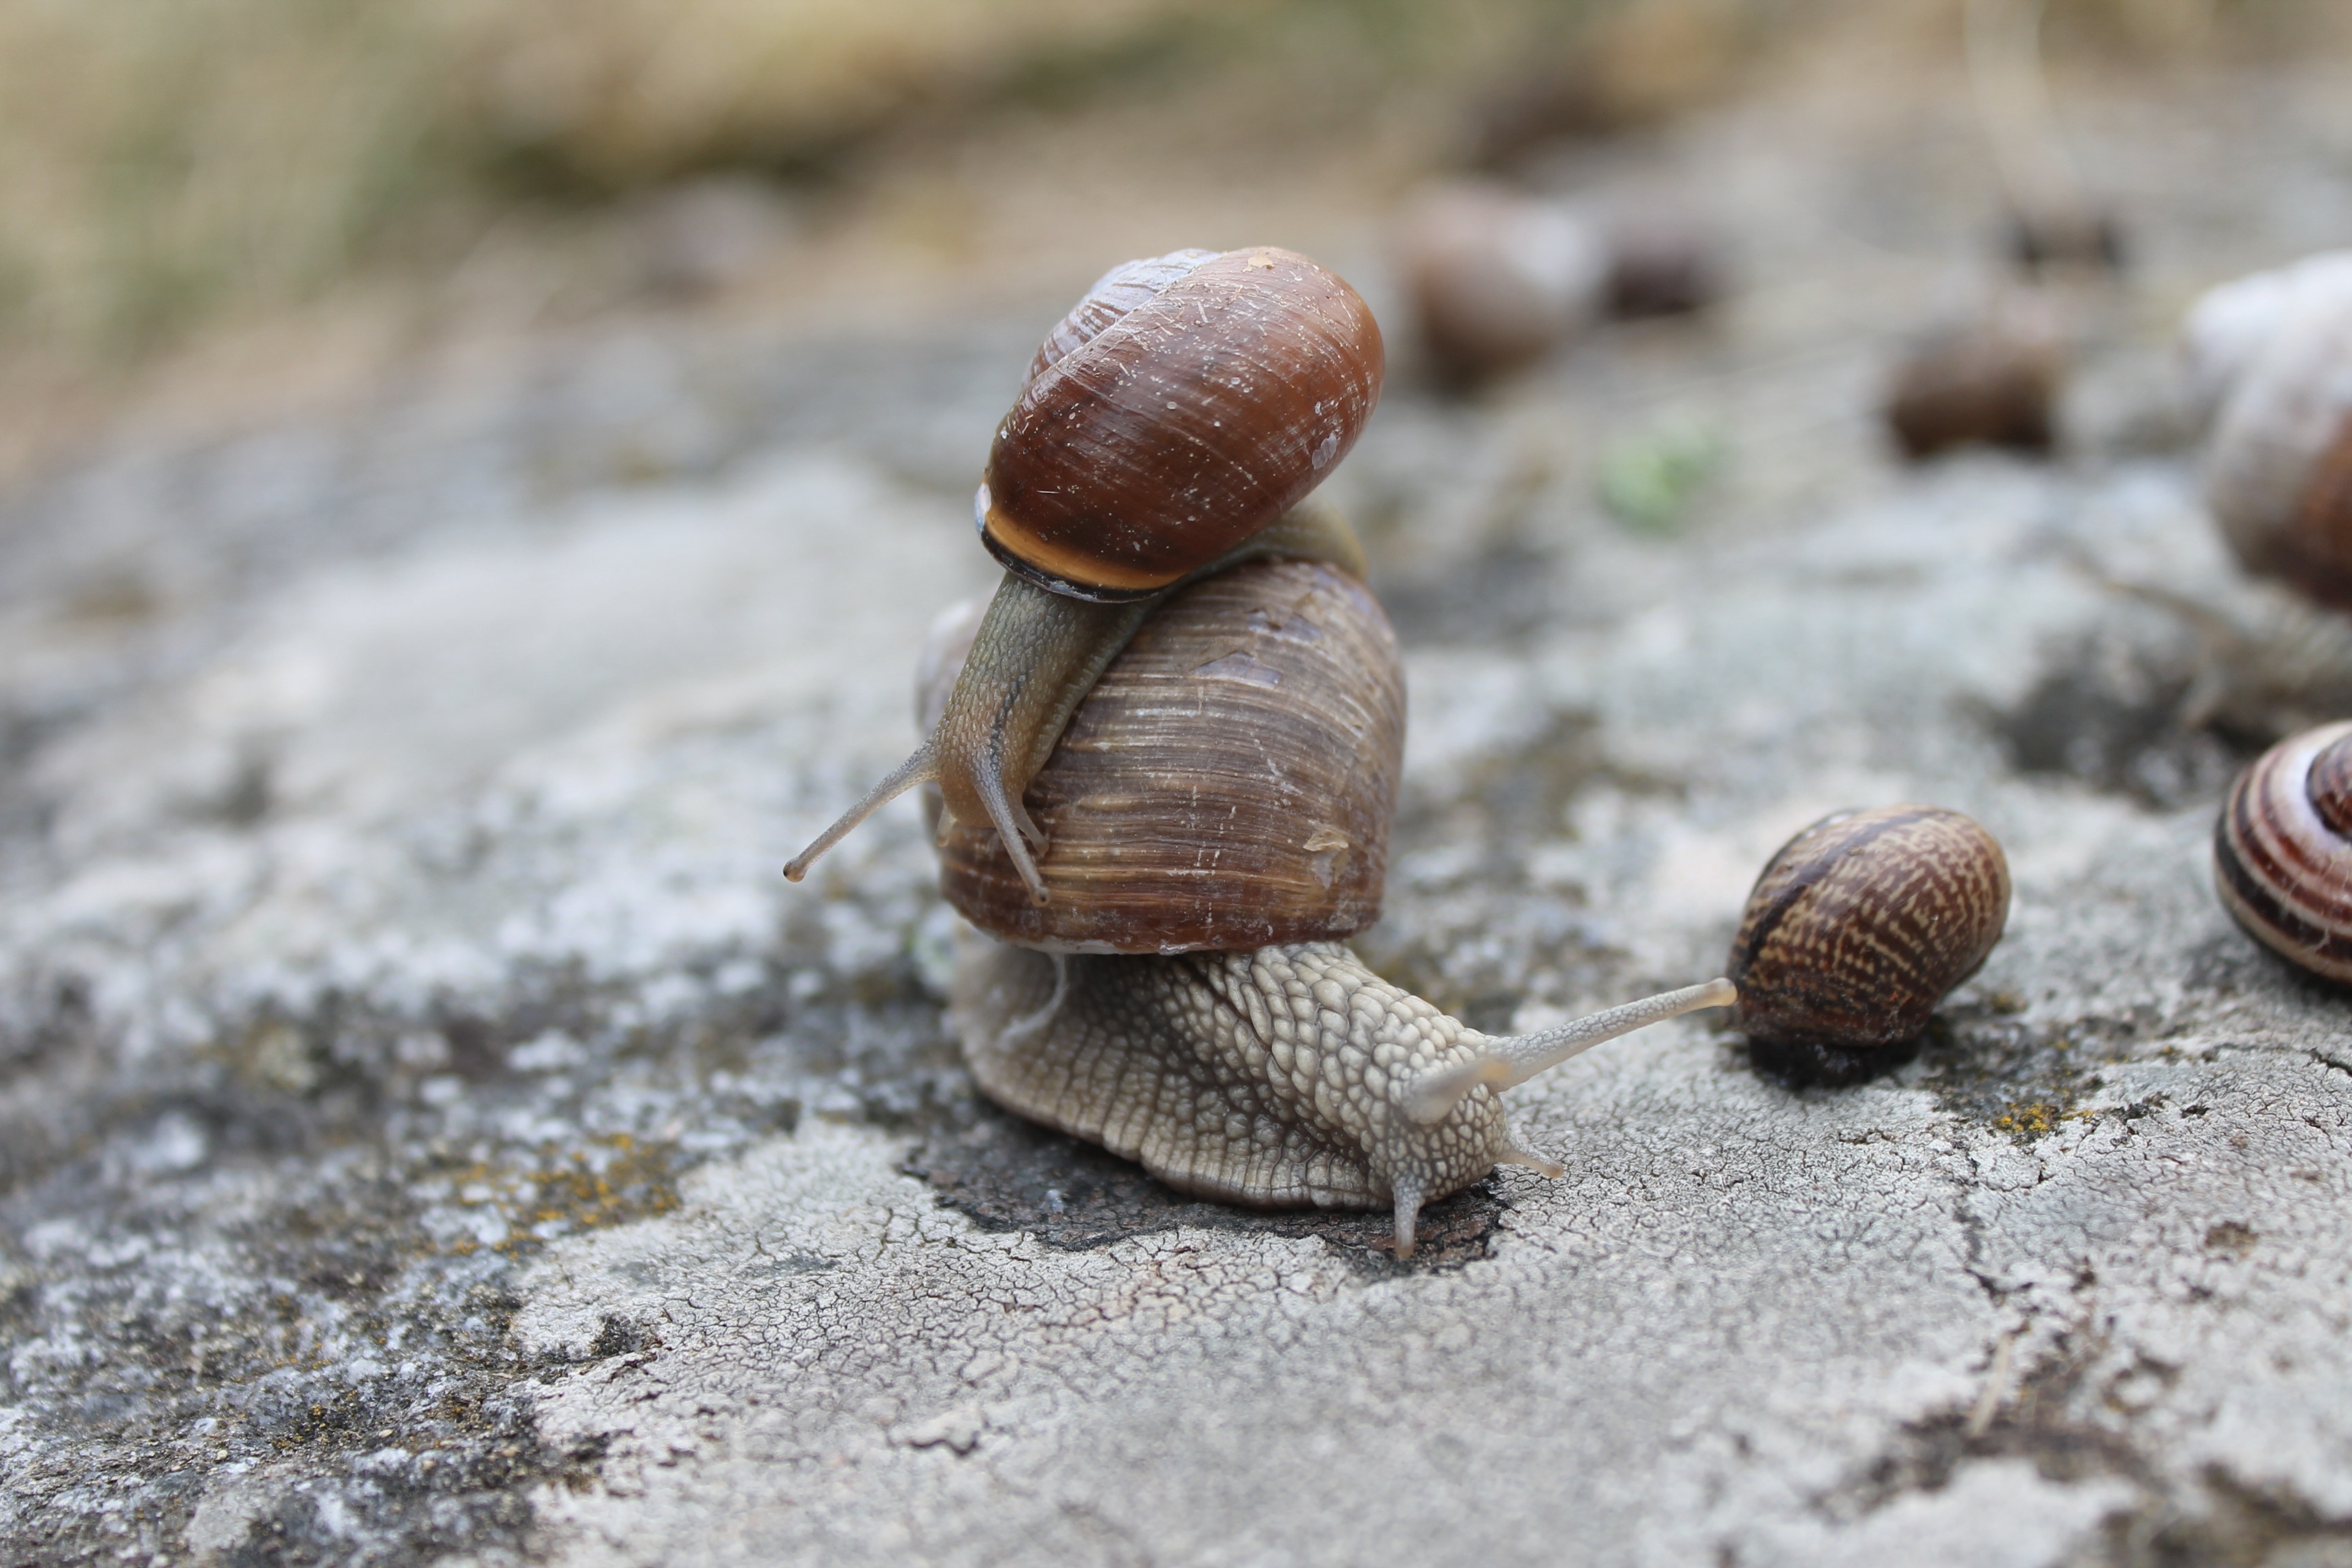 two brown snails closeup photography